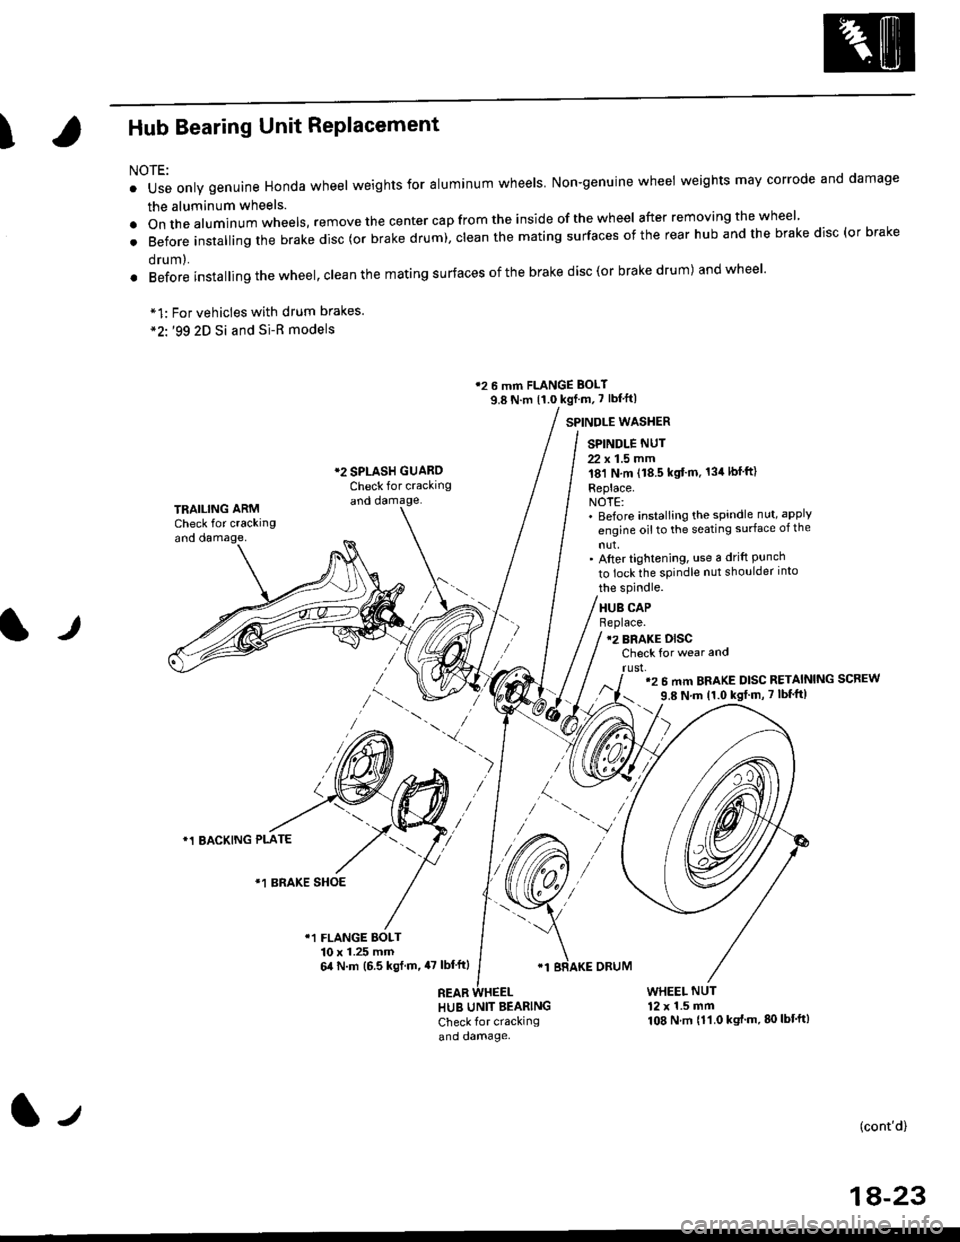 HONDA CIVIC 1996 6.G Workshop Manual IHub Bearing Unit RePlacement
For vehicles with drum brakes.99 2D Si and Si-B models
NOTE:
o Use only genuine Honda wheel weights for aluminum wheels Non-genuine wheel weights may corrode and damage
